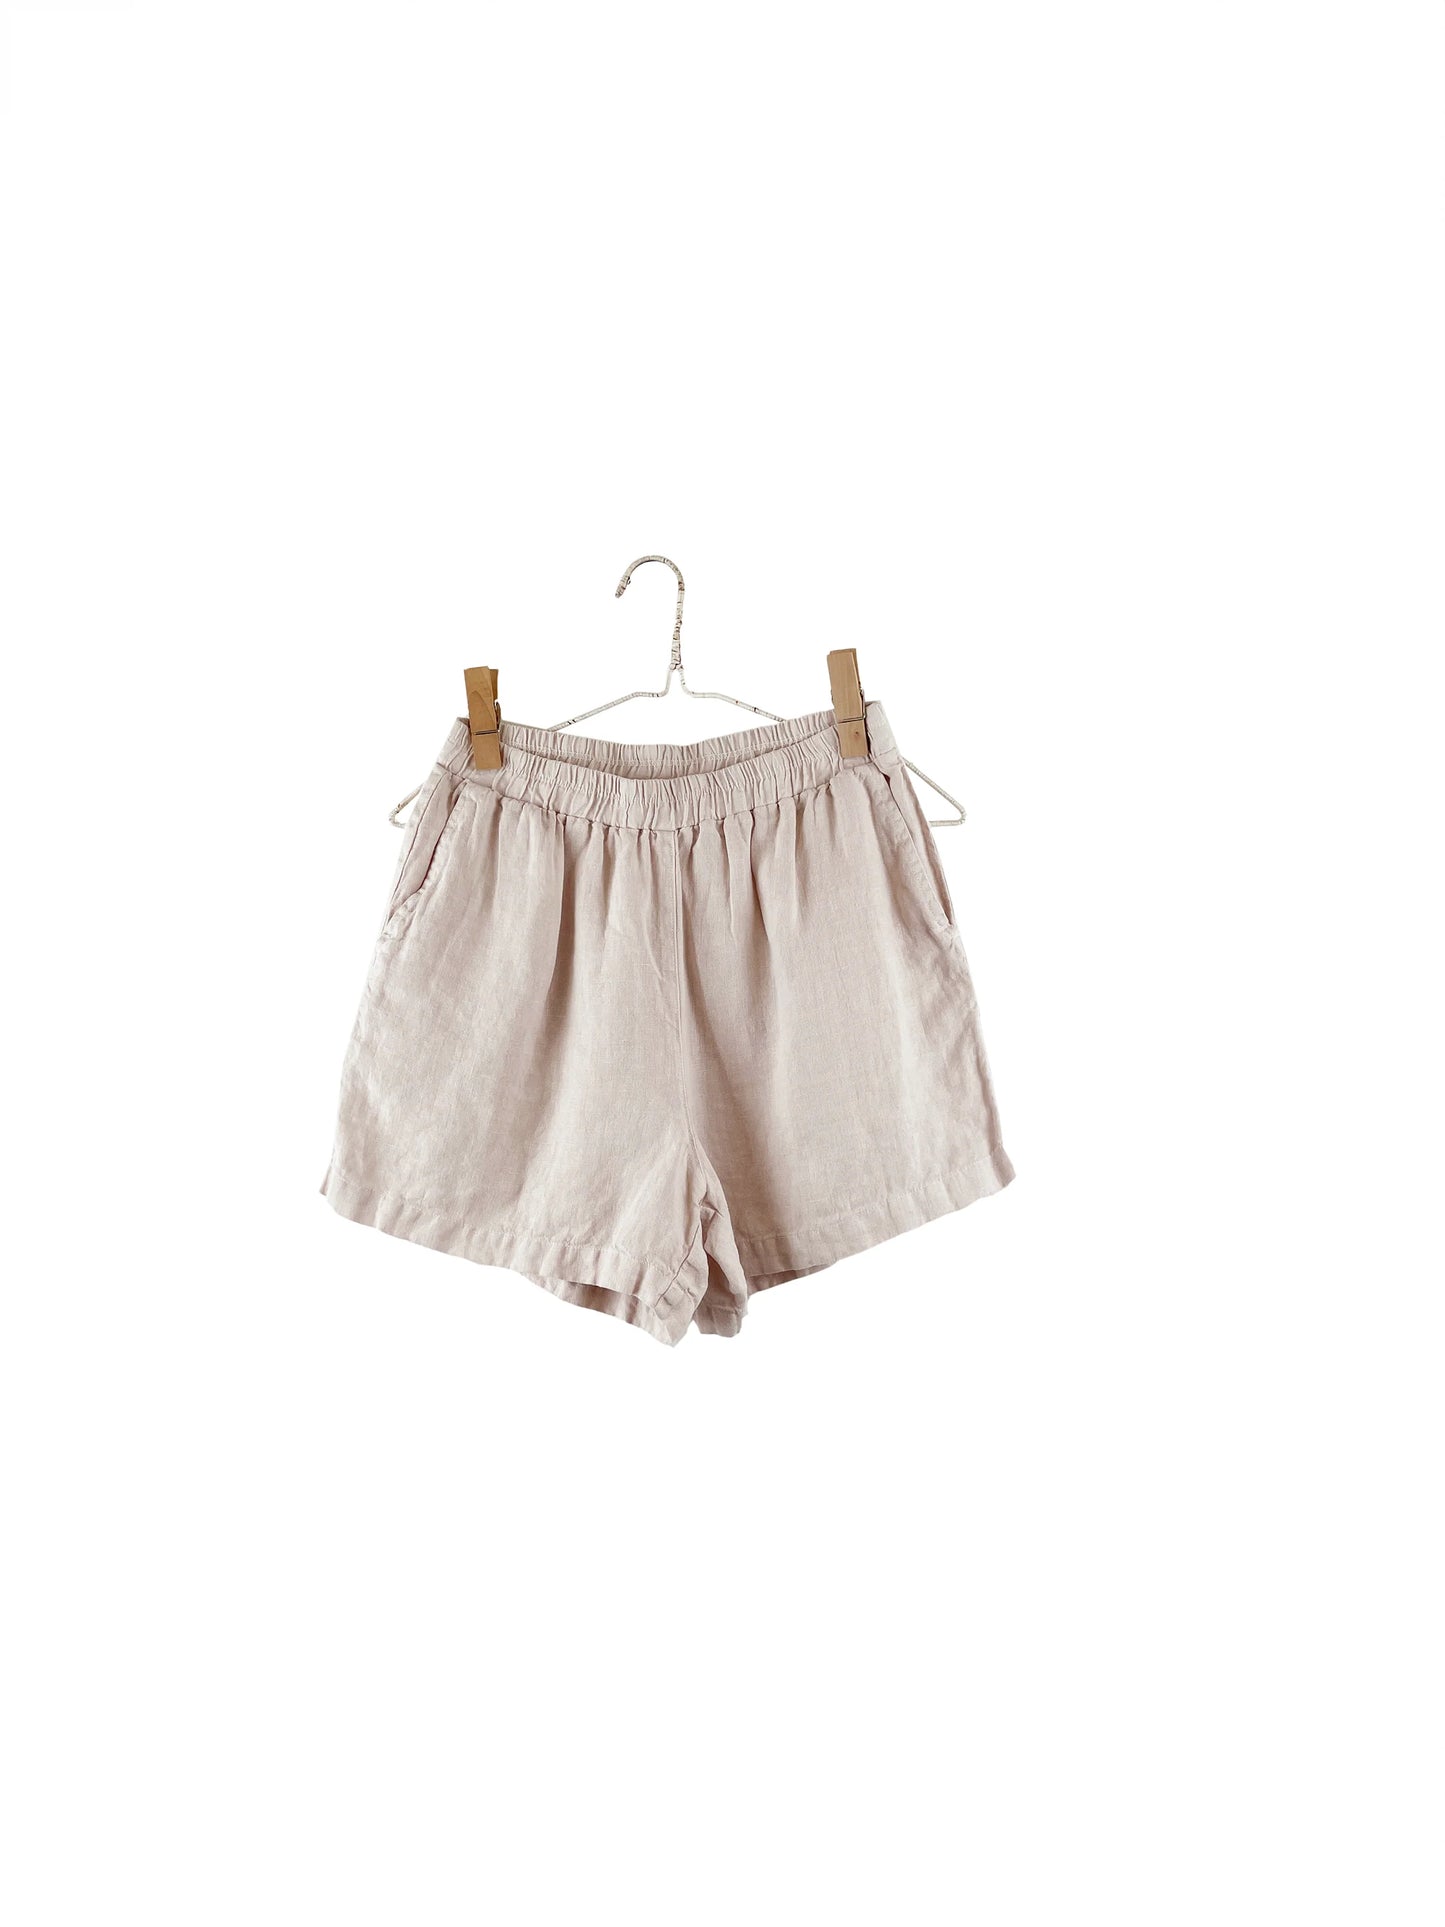 SS24 - It is Well L.A - Linen Shorts in Natural - front display 2